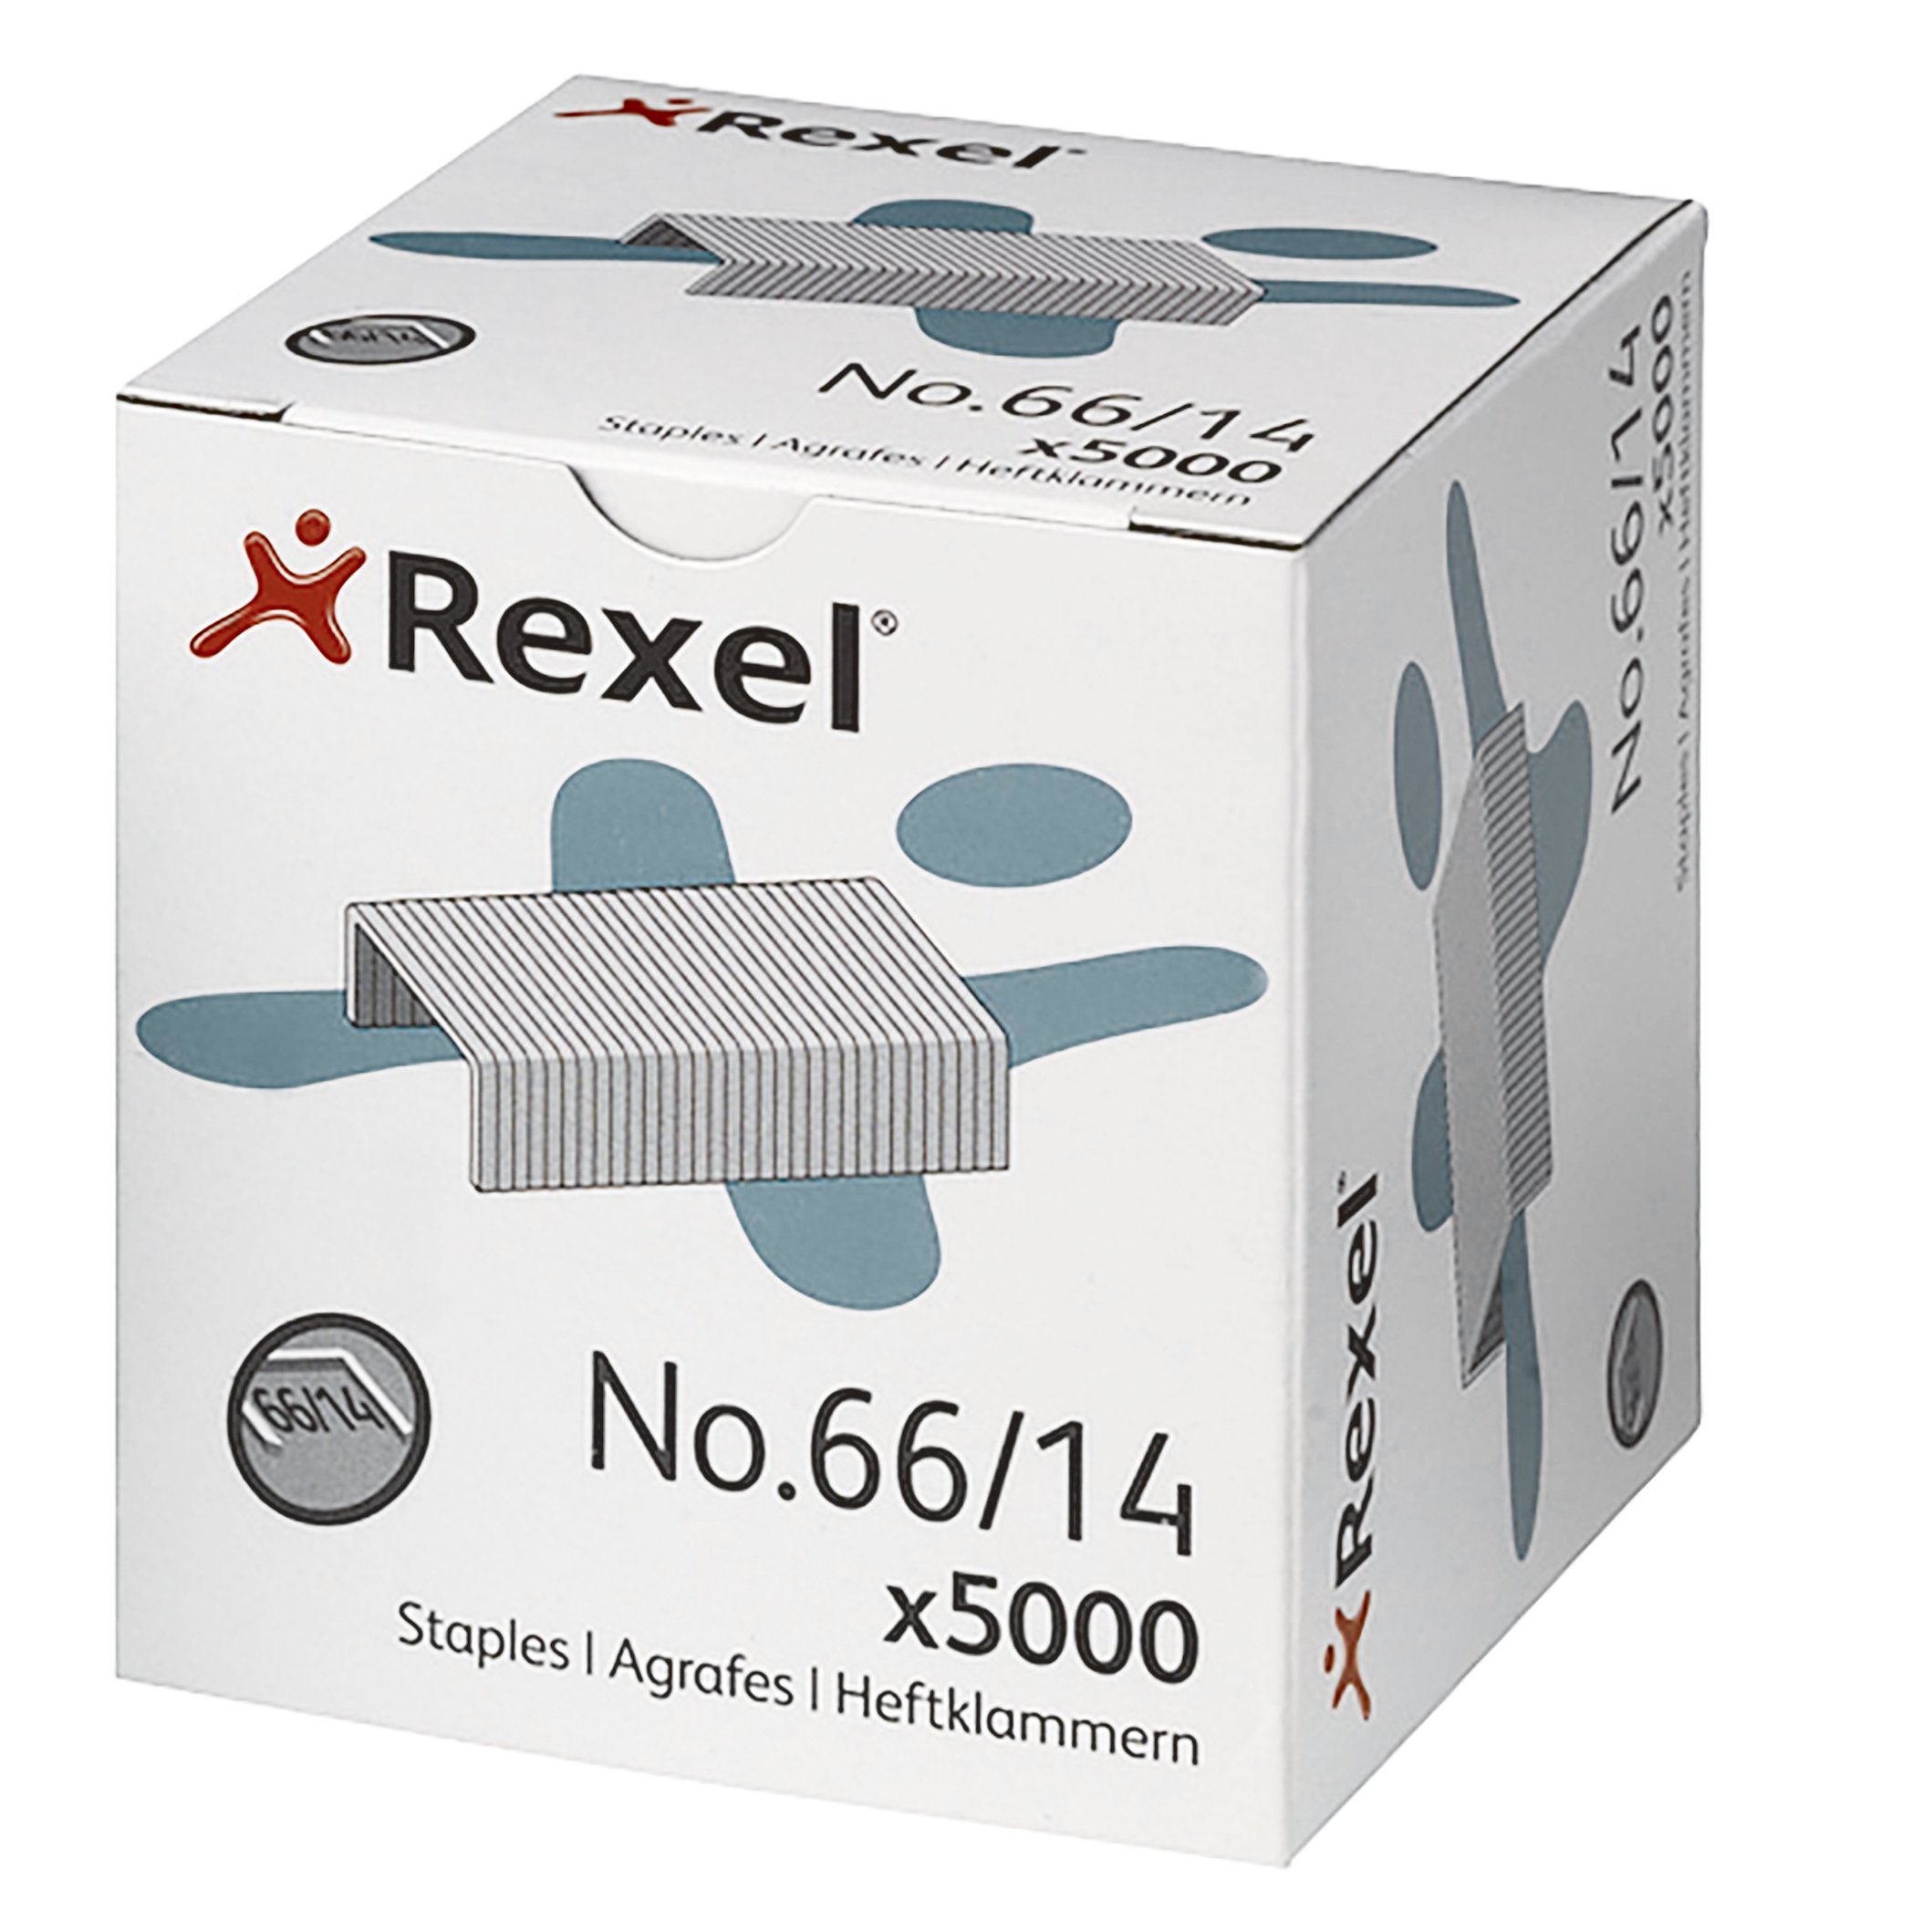 Rexel 66/14 Staples 14mm R06075 (Box 5000) - Click Image to Close